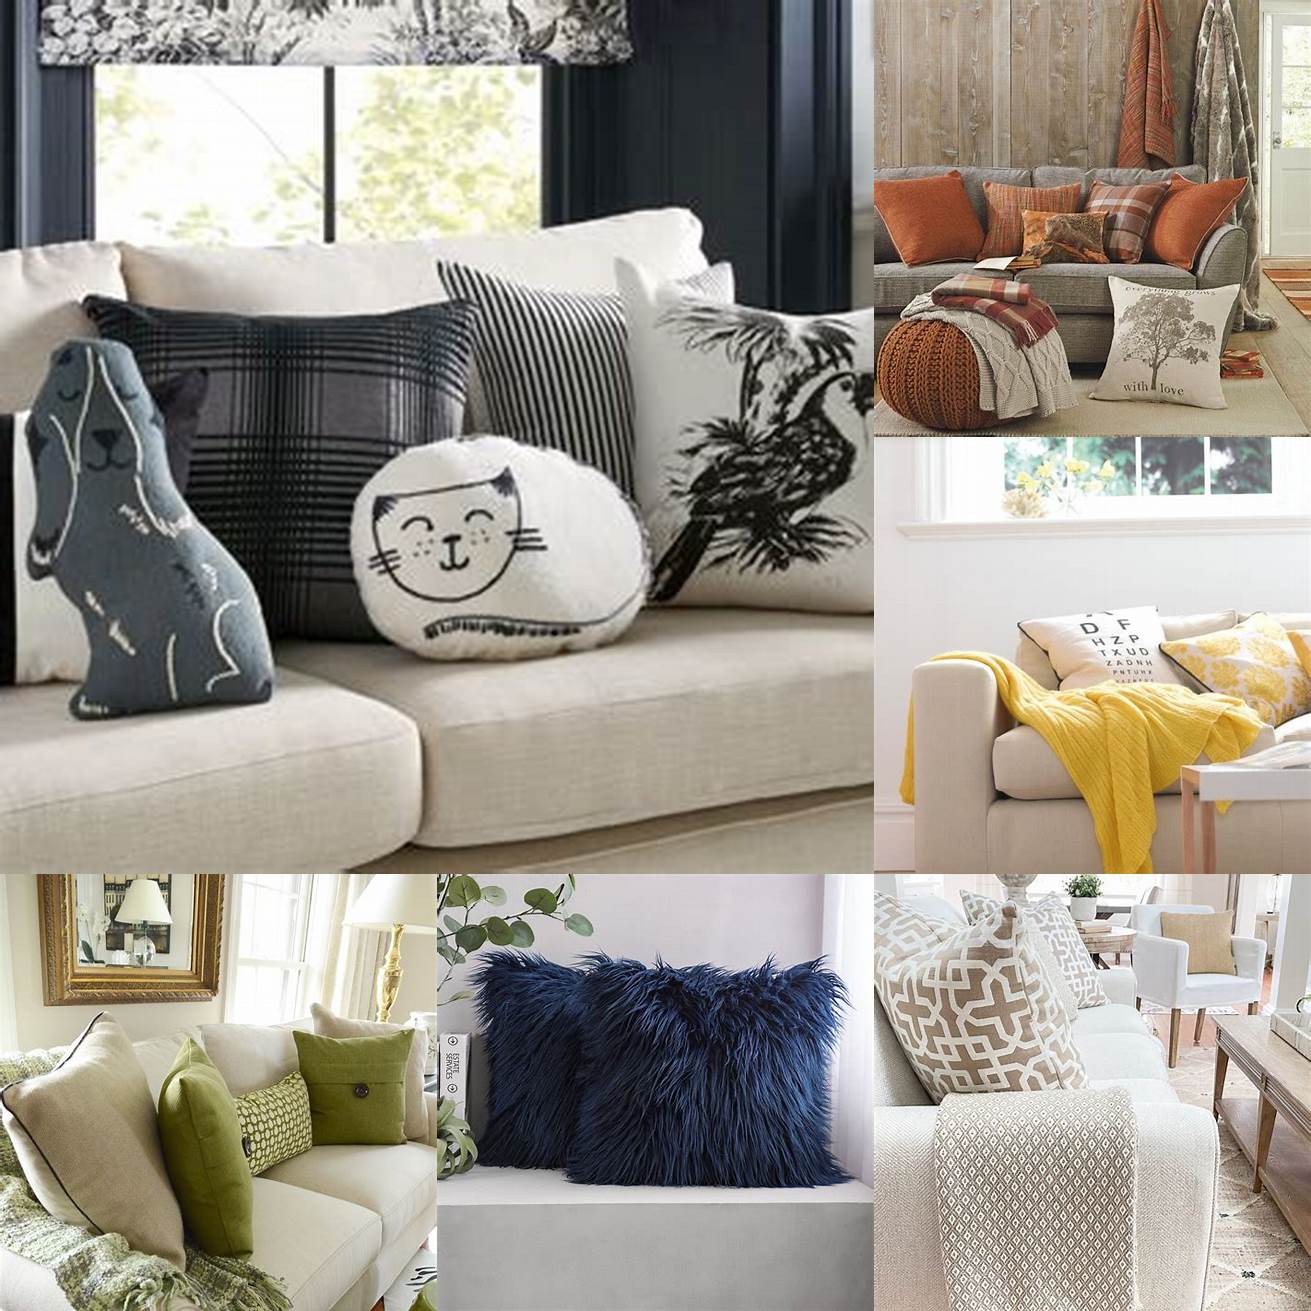 Accessorize with cushions and throws Cushions and throws can add texture color and comfort to your high back sofa You can mix and match different patterns colors and materials to create a cozy and inviting look